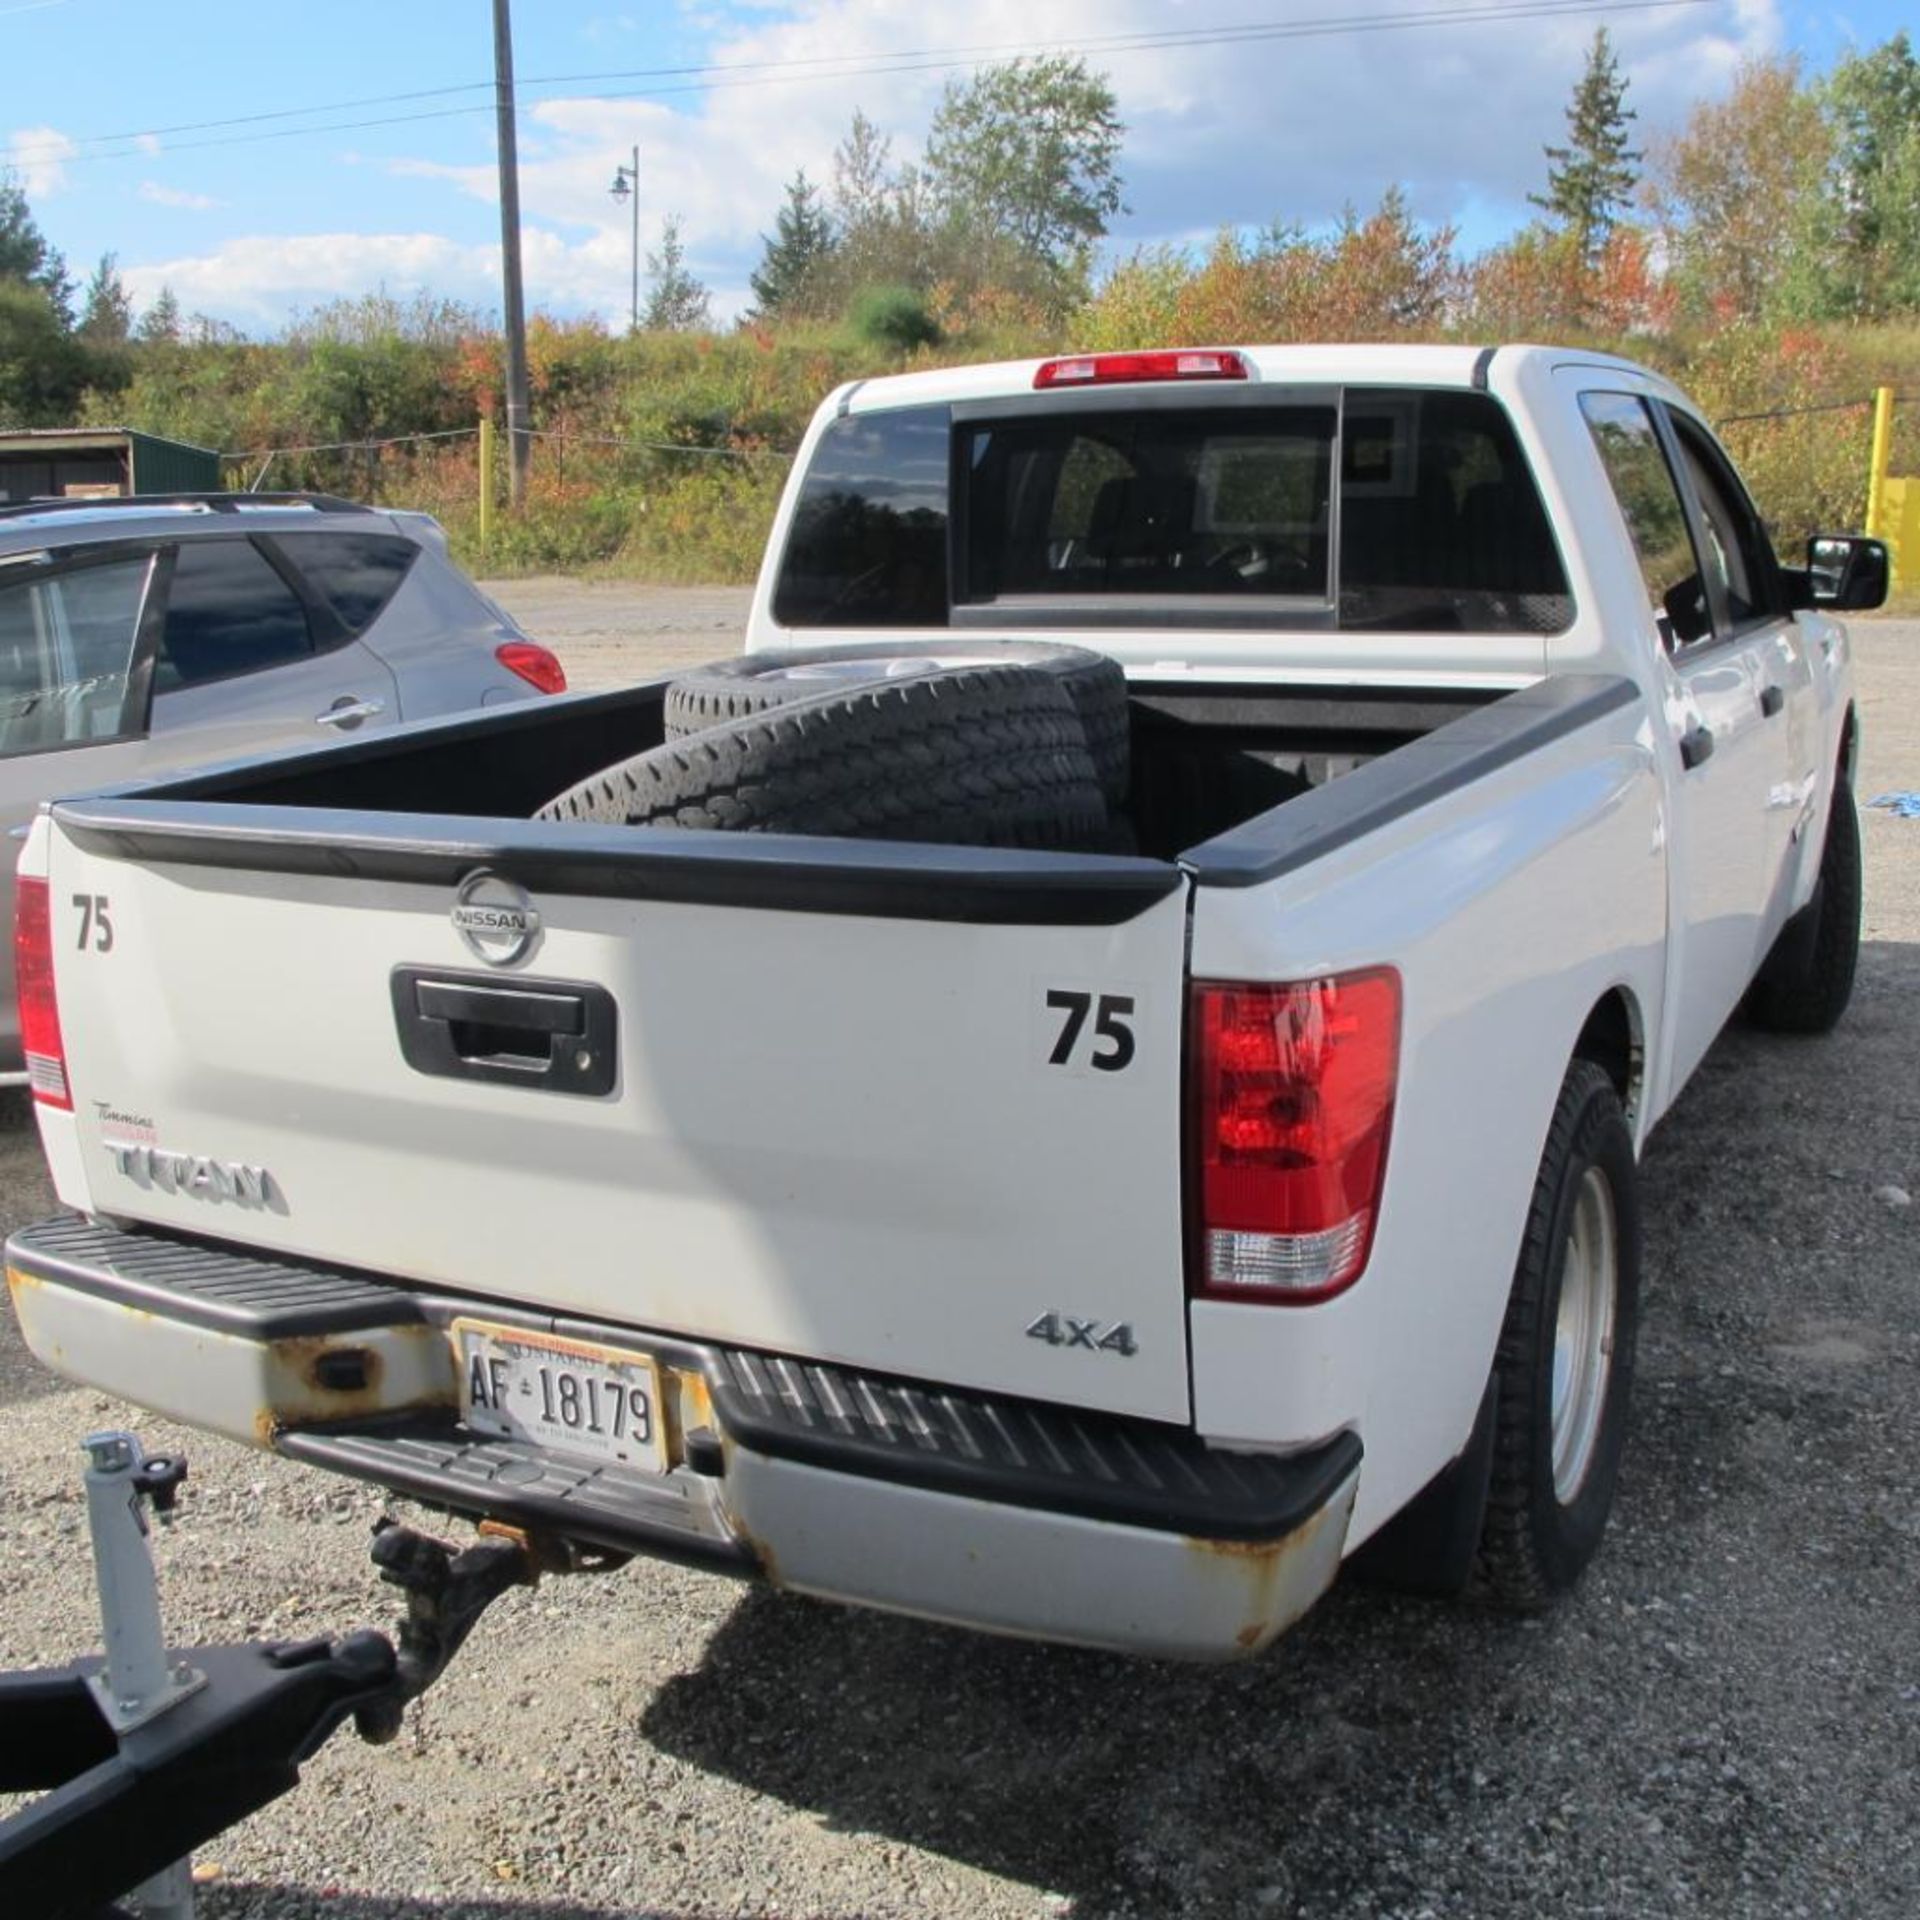 2013 NISSAN TITAN CREW CAB, 92574 KM INDICATED, 4X4, 5.6L, V-8, INCLUDES SUMMER TIRES ON RIMS, 1N6AA - Image 4 of 13